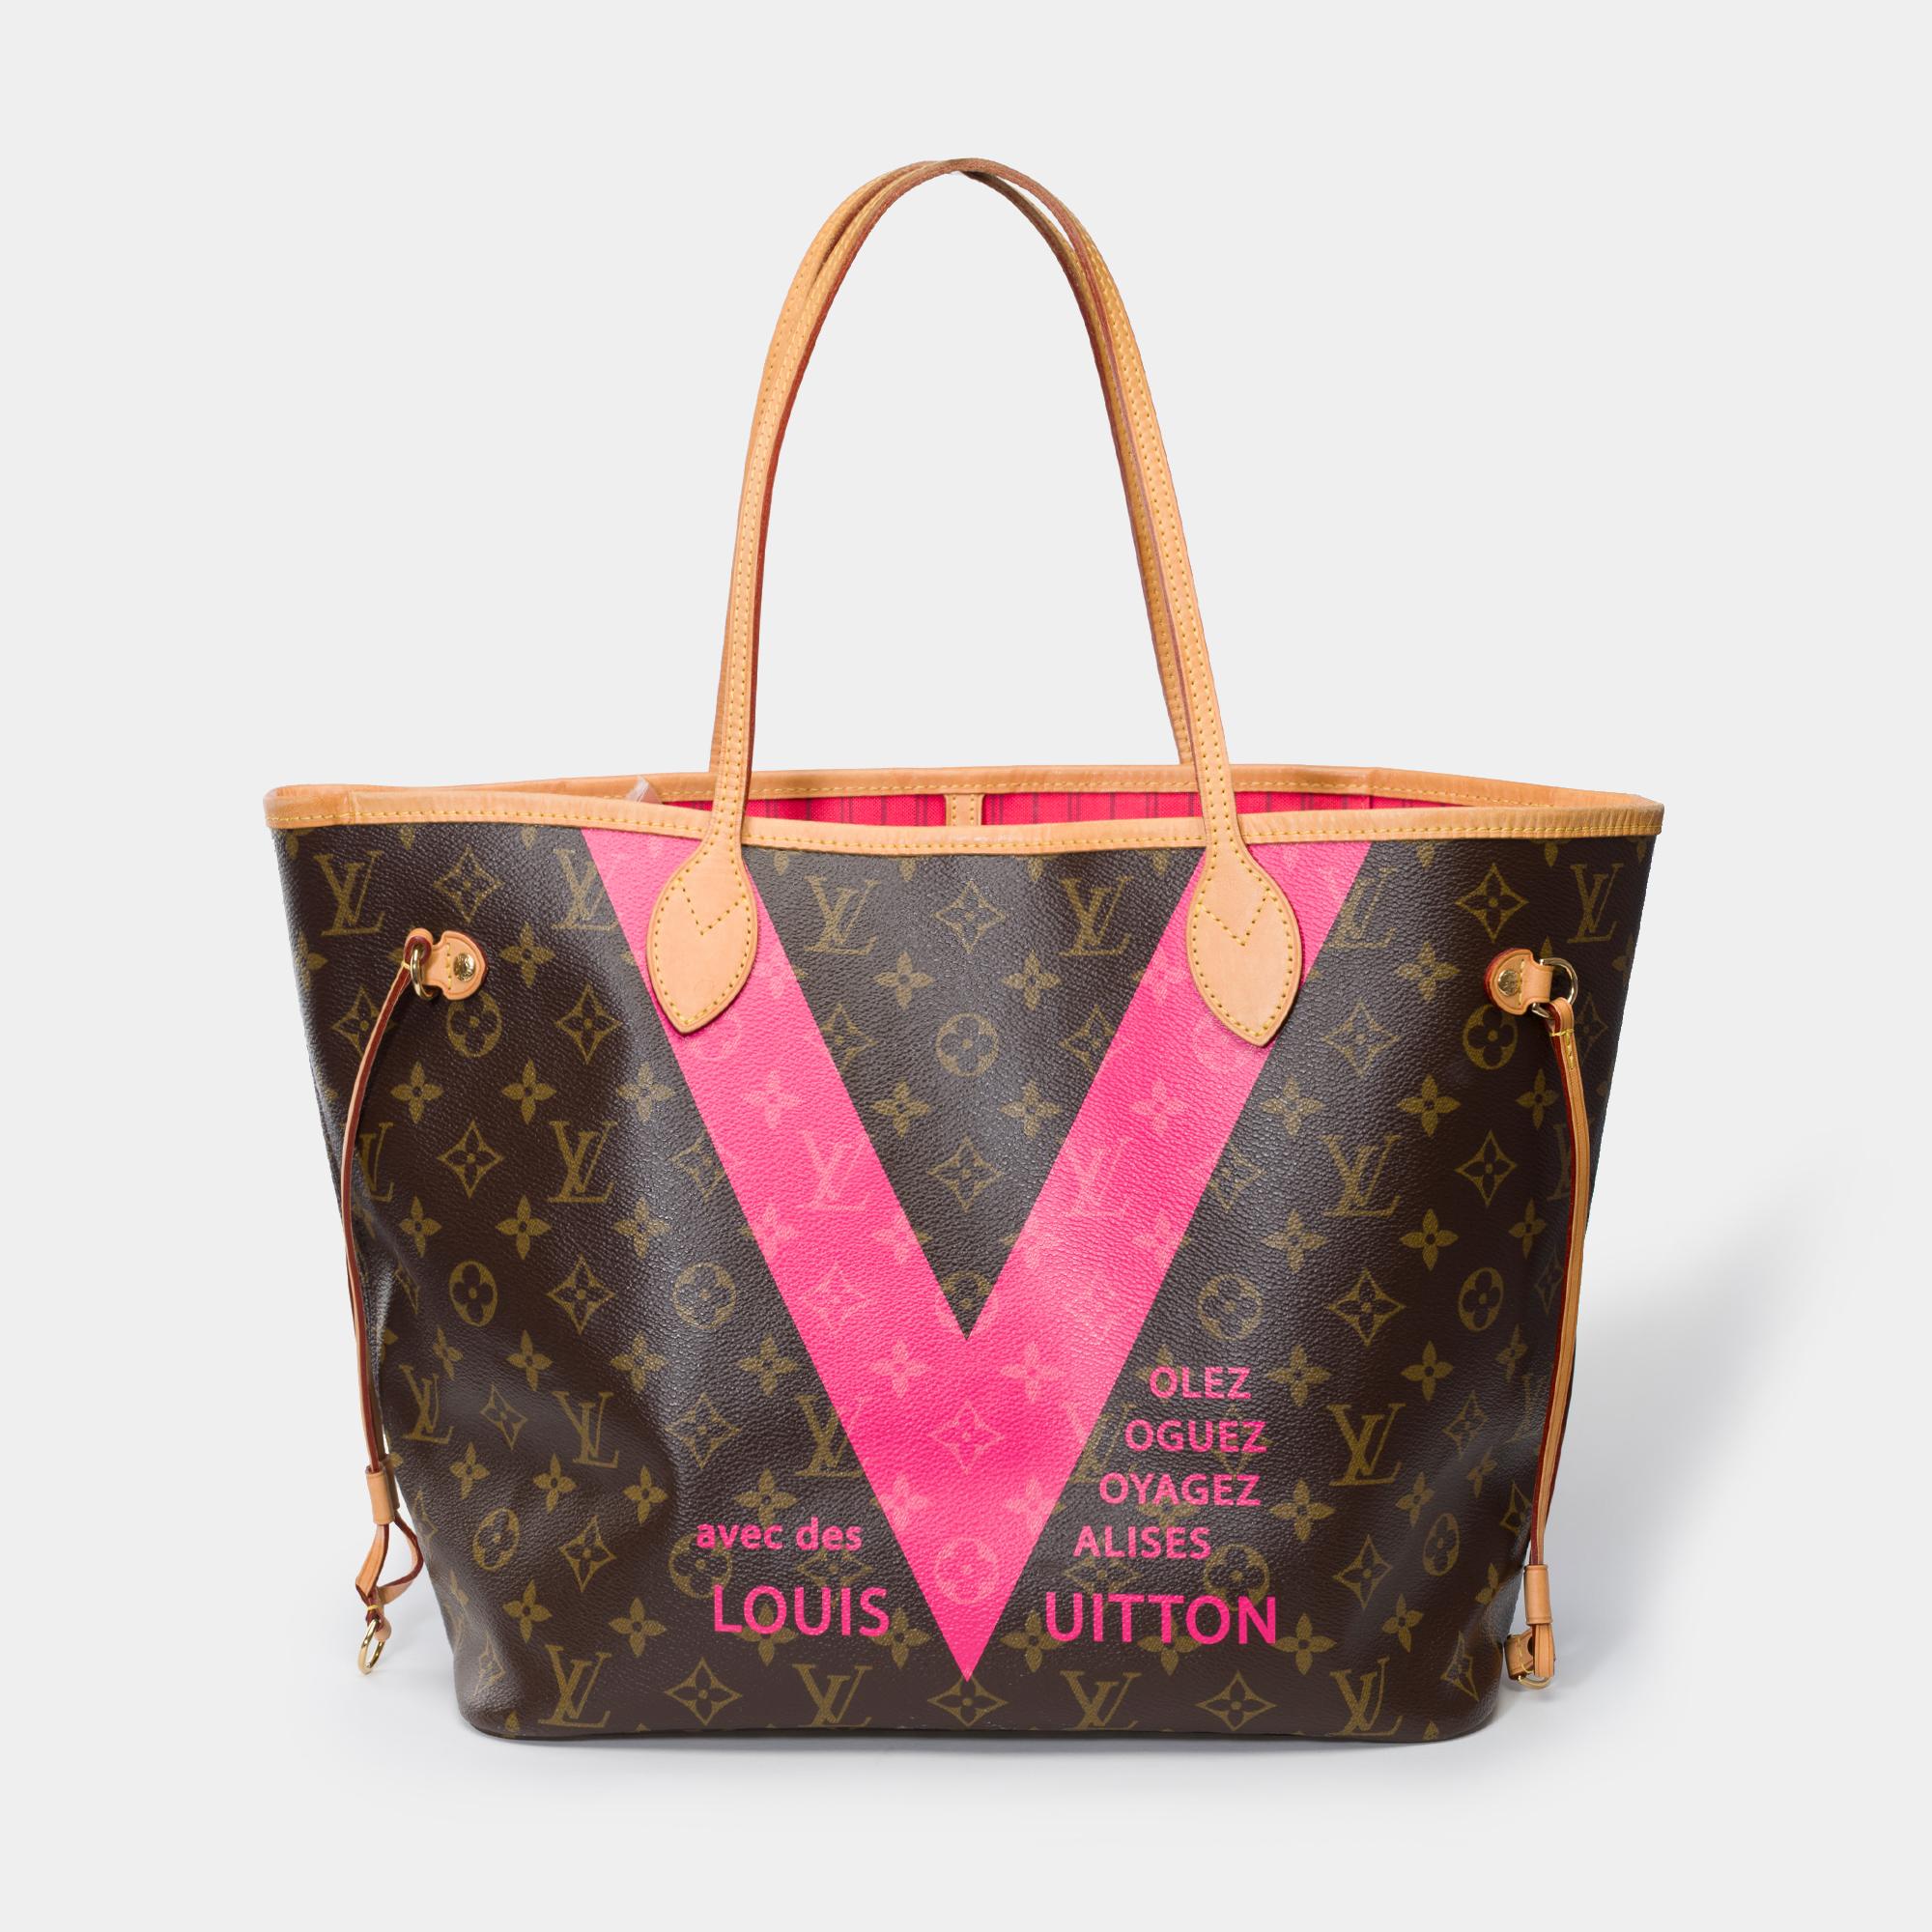 COLLECTOR (Only 250 pieces over the world) - Limited Edition Saint-Tropez Fuchsia 2016

Amazing Louis Vuitton Neverfull MM Tote bag in brown canvas monogram limited series V Fuchsia 